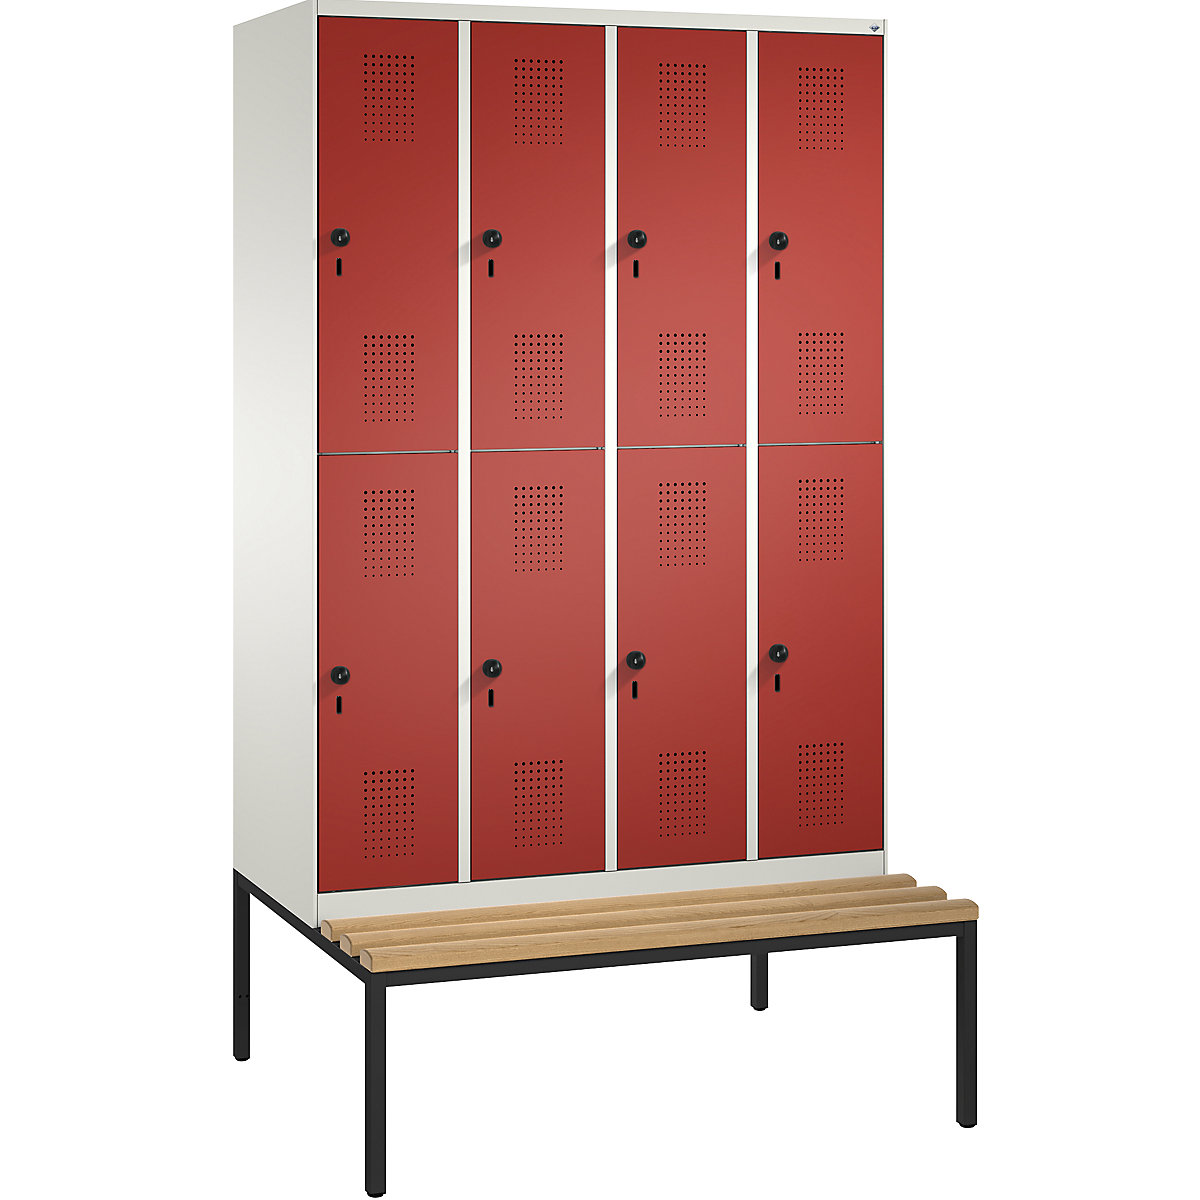 EVOLO cloakroom locker, double tier, with bench – C+P, 4 compartments, 2 shelf compartments each, compartment width 300 mm, pure white / flame red-15